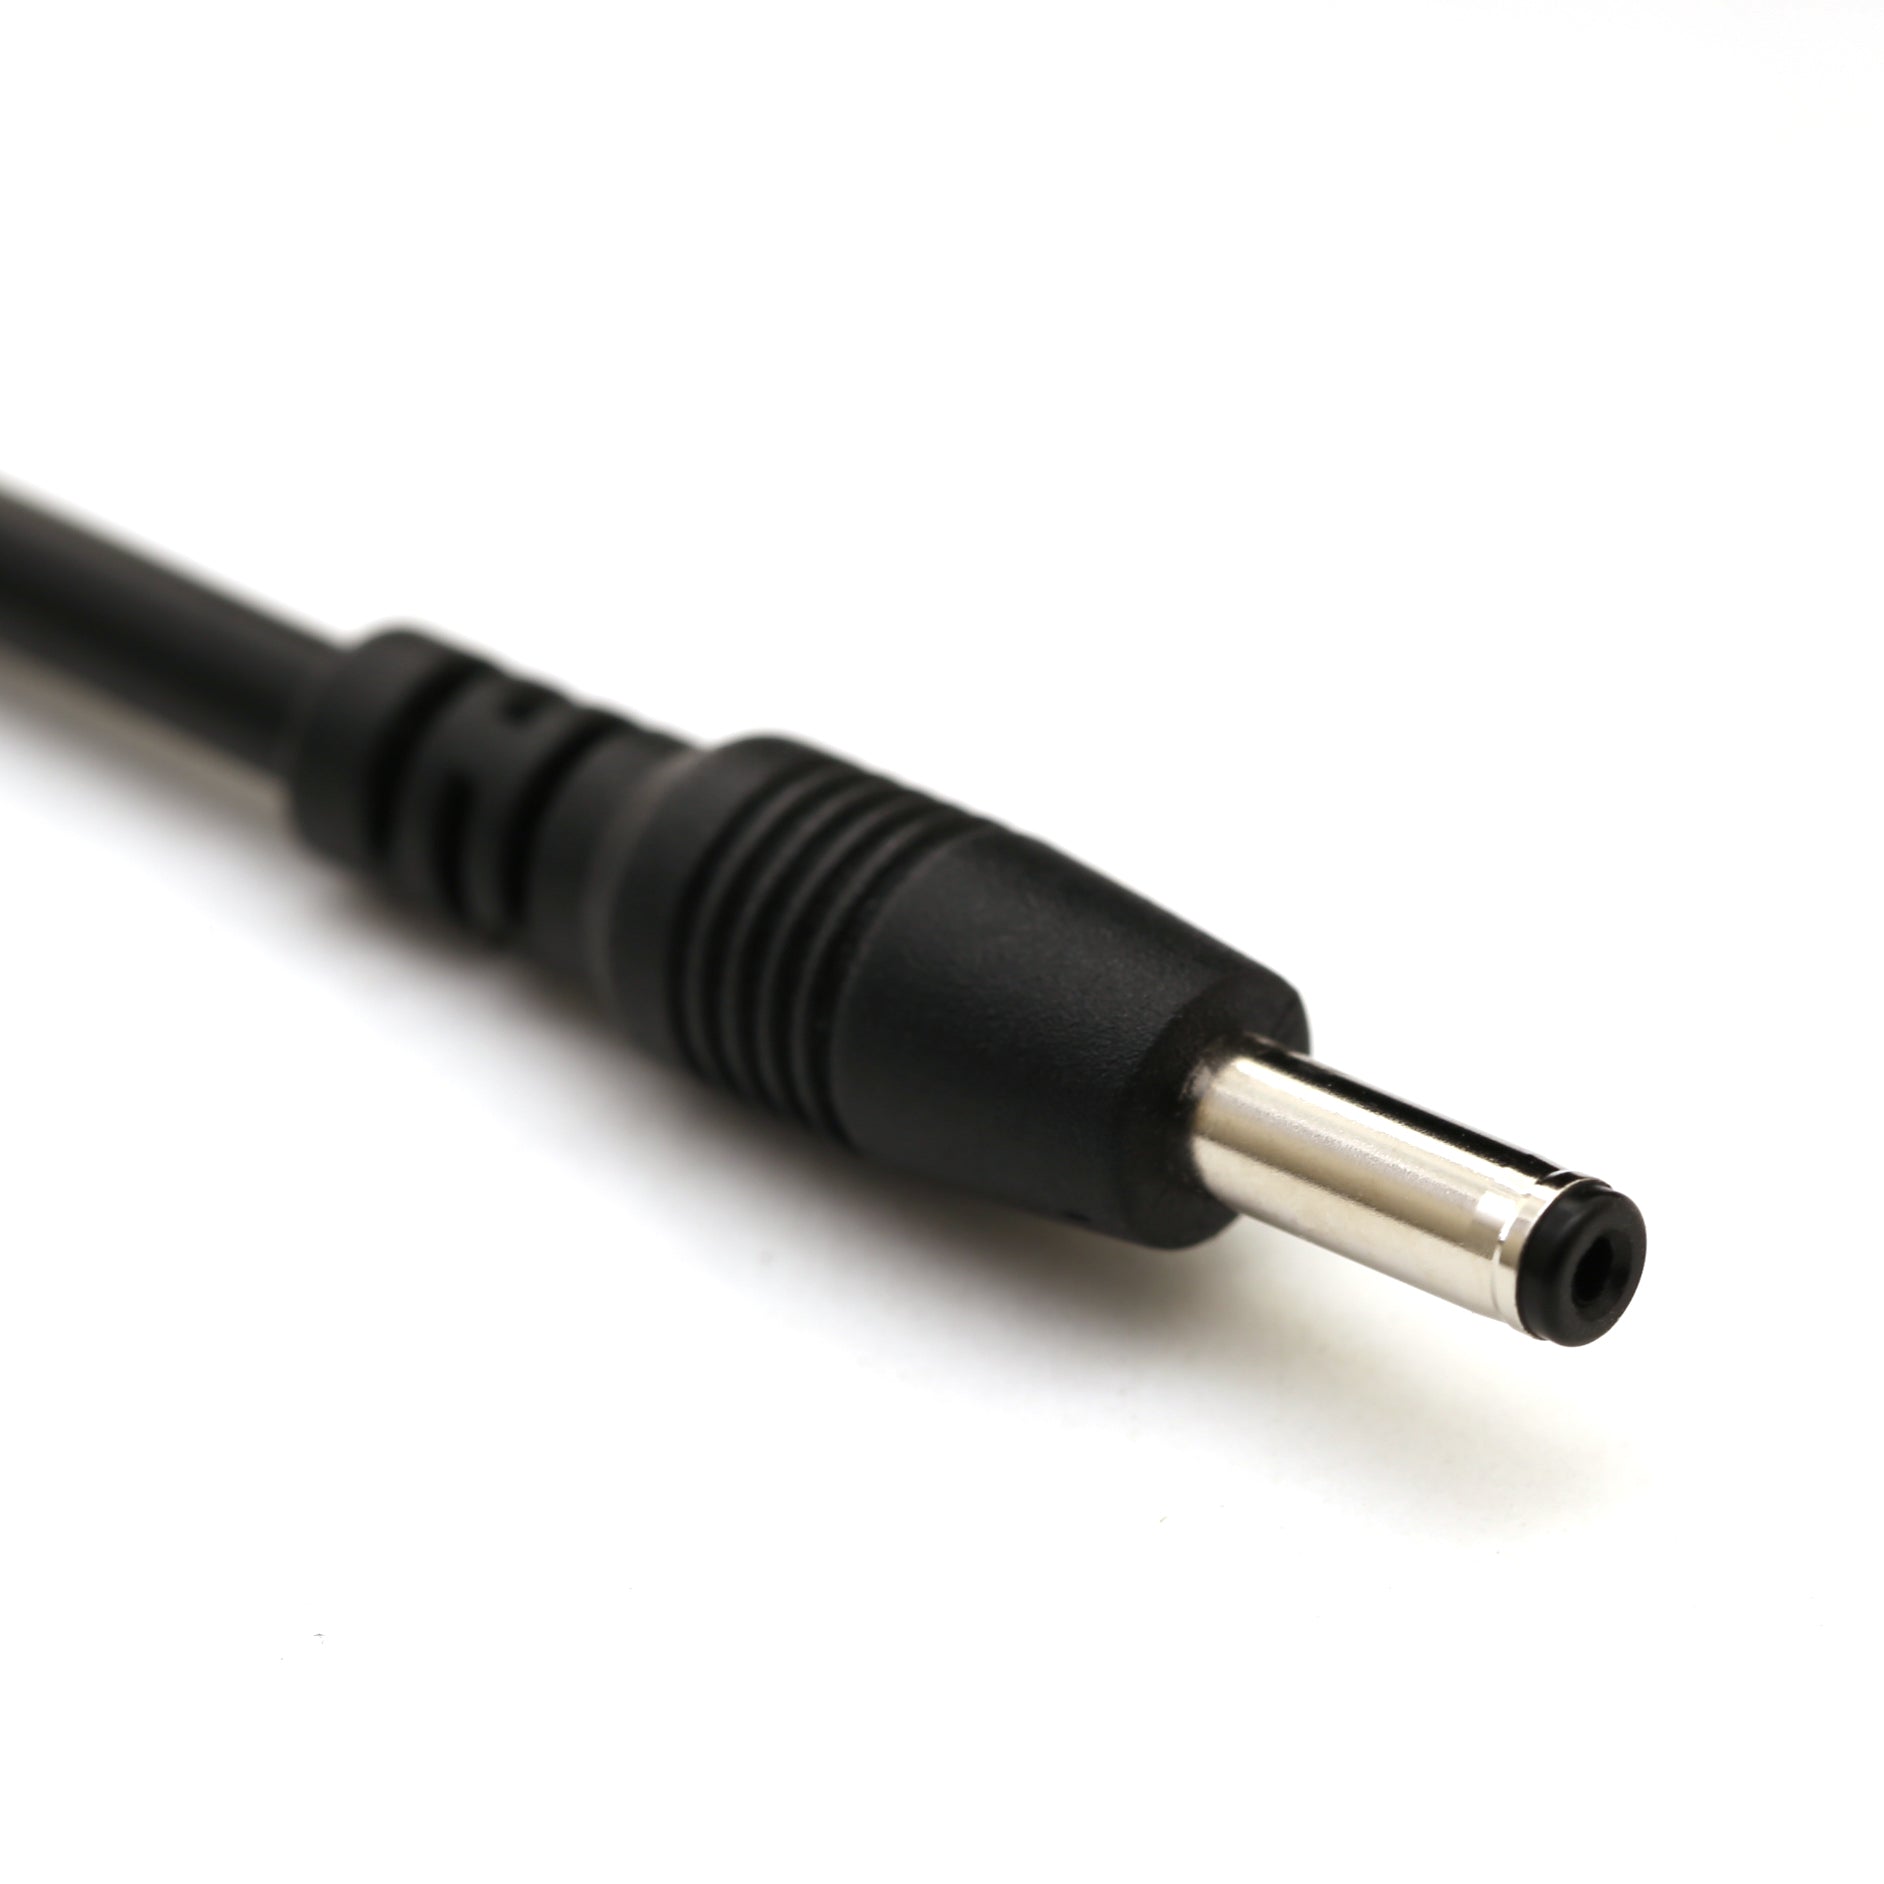 15ft In-Wall Rated Interconnect Cable for Modular LED Under Cabinet Lighting (Black)